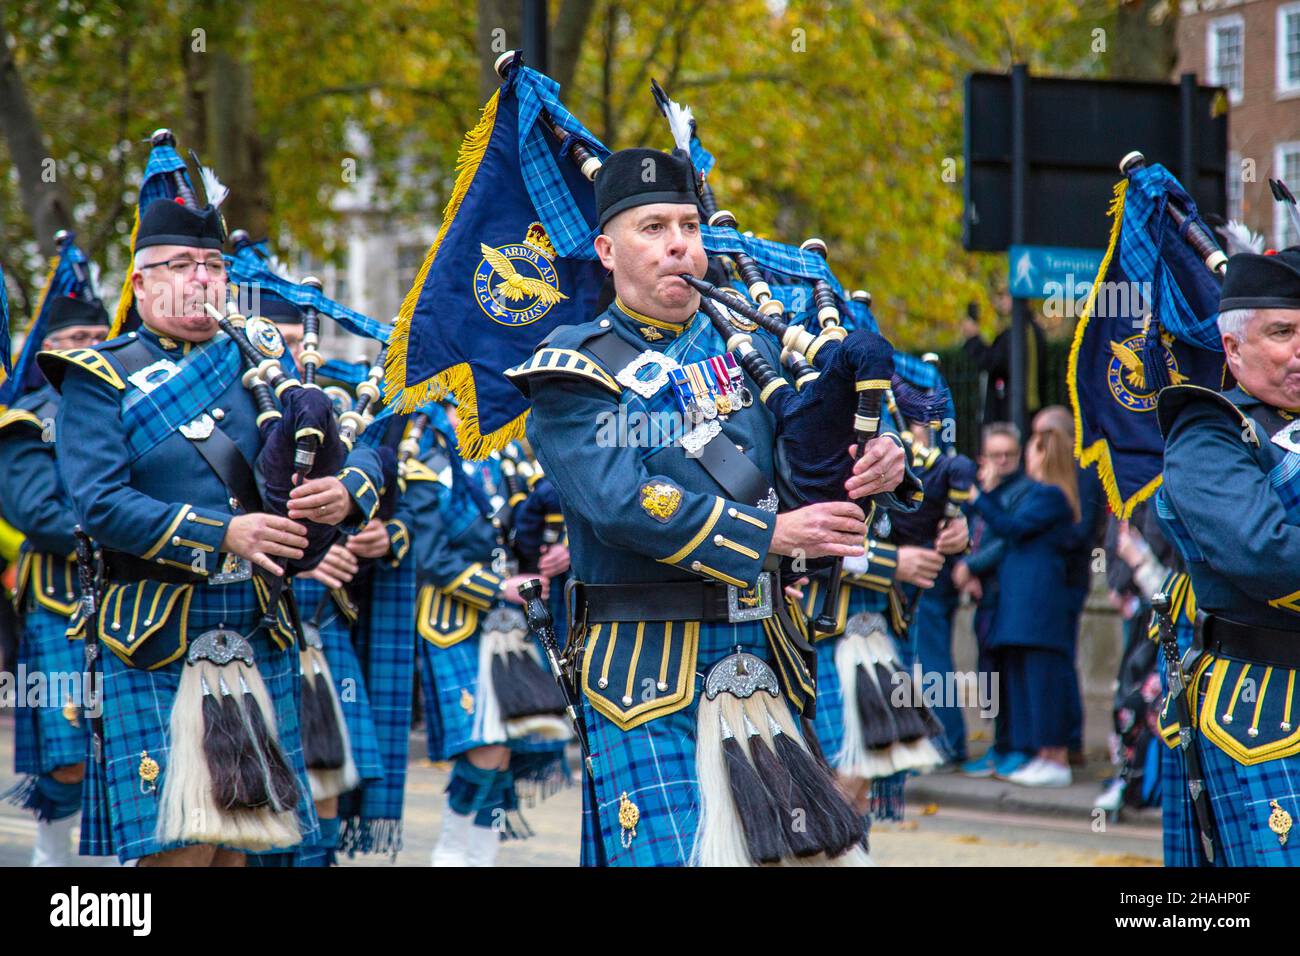 13 November 2021, London, UK - Lord Mayor's Show, RAF Waddington Pipes & Drums in kilts, matching and playing pipes Stock Photo